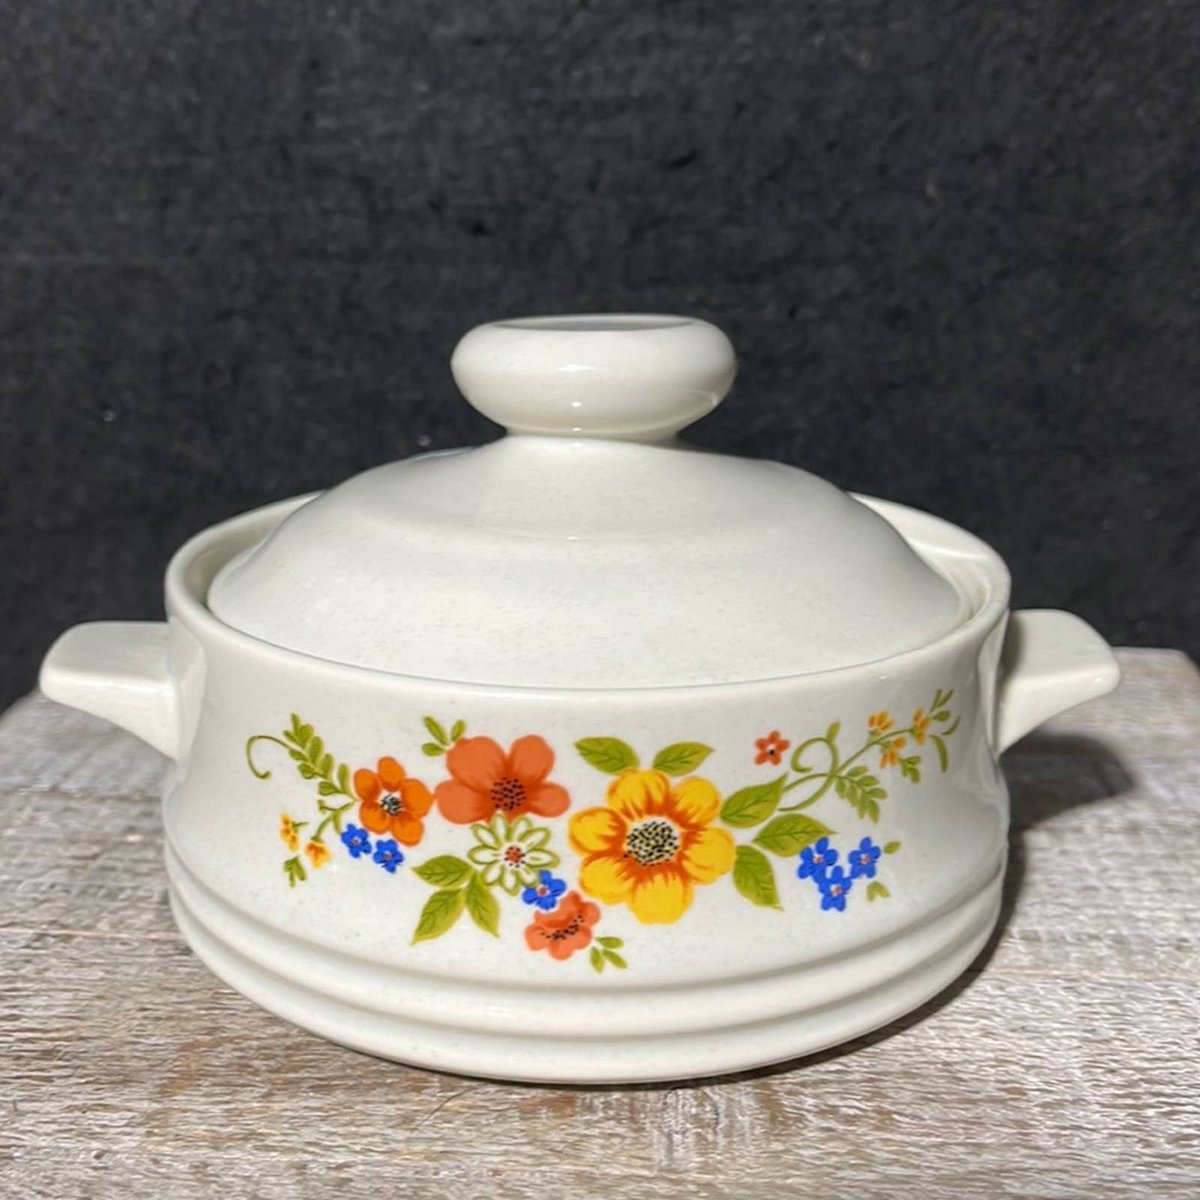 Excited to share the latest addition to my #etsy shop: Vintage Heavenly Bake Serve n Store Stoneware ,Single Serve Casserole etsy.me/43cGapD #white #individualcasserole #smallbowl #vintagestoneware #singledish #sweetflowers #thenowandthenmarket